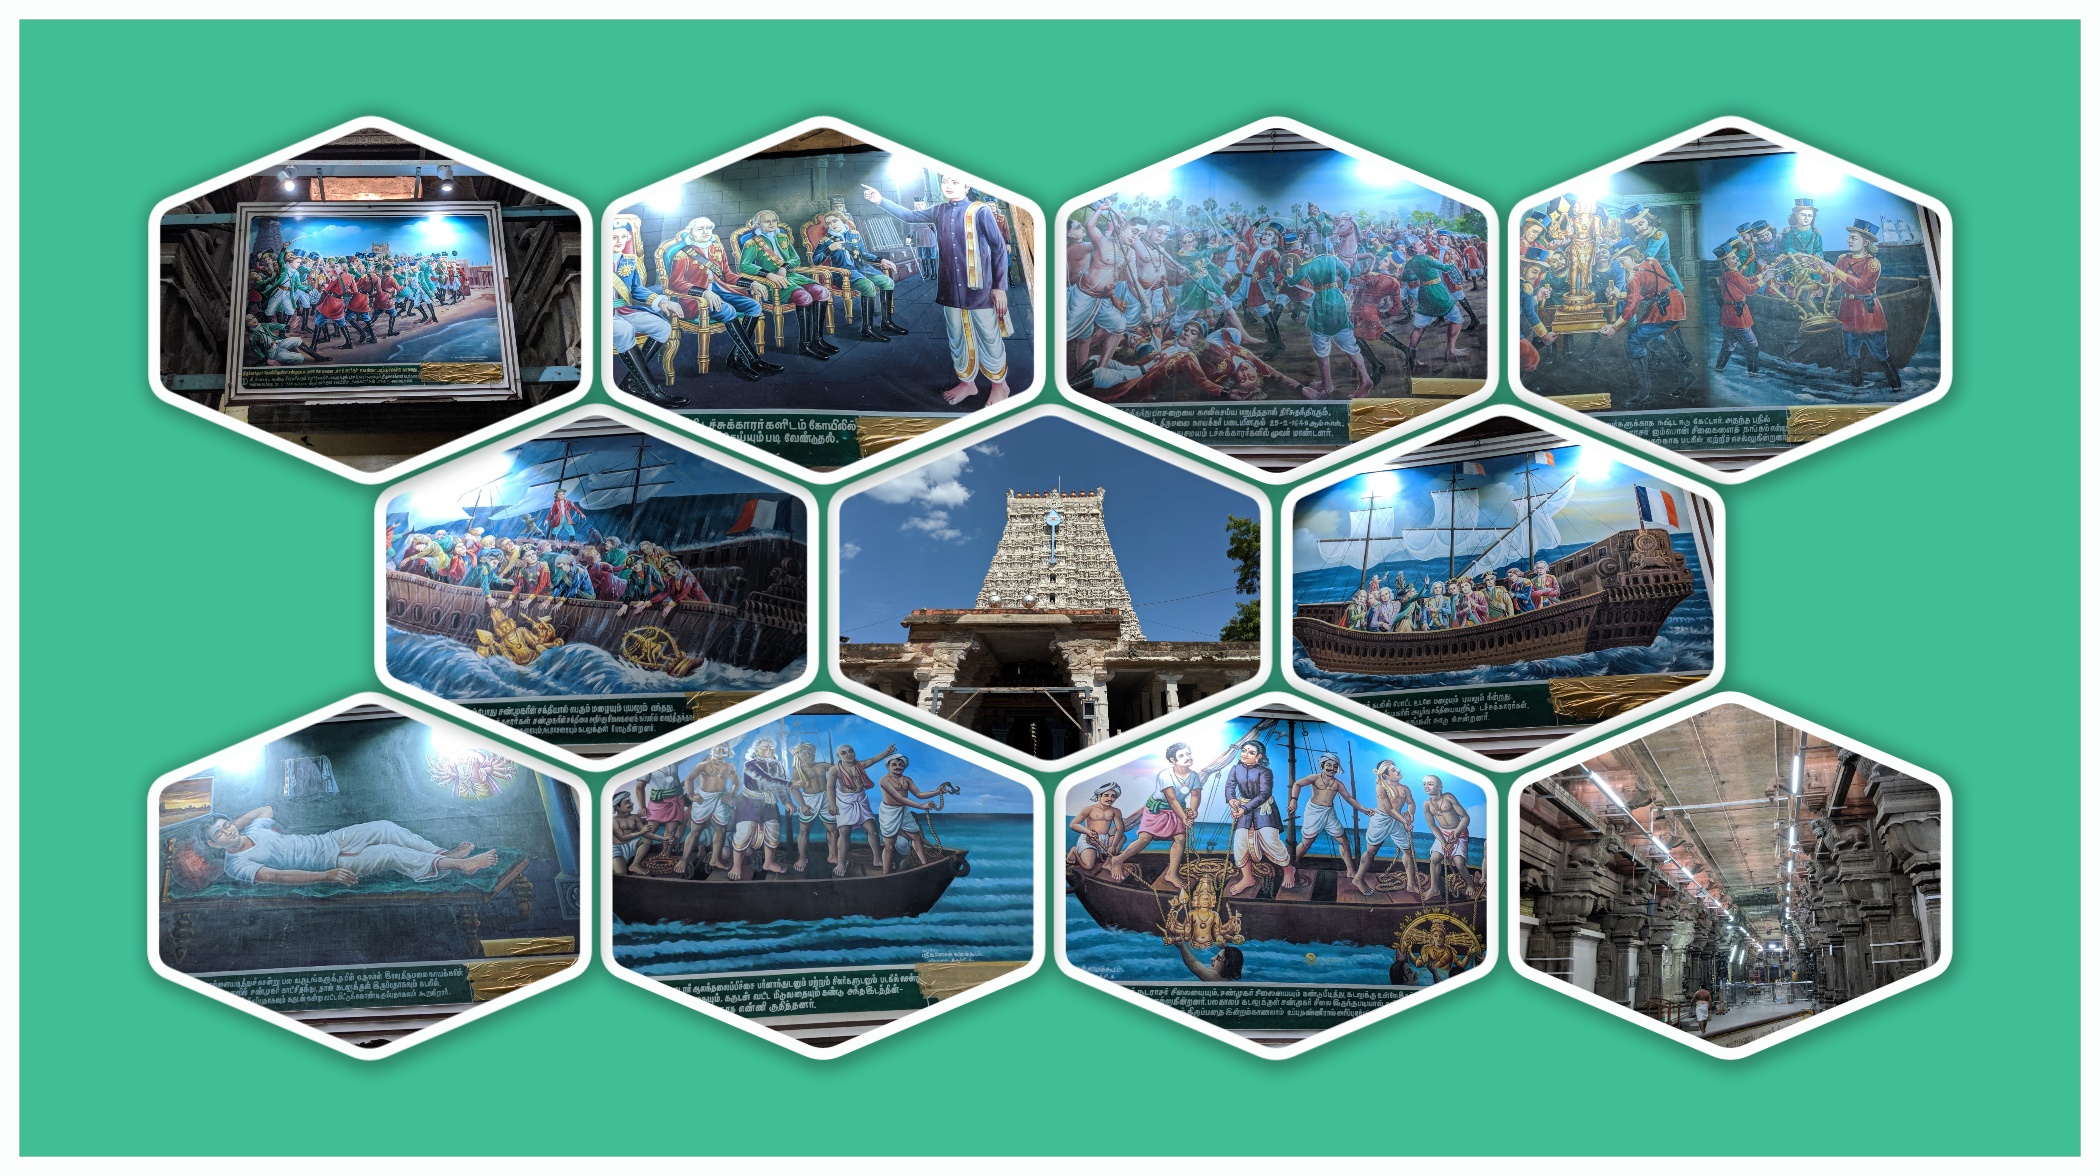 Story of the Dutch Occupation of the Thiruchendur Temple